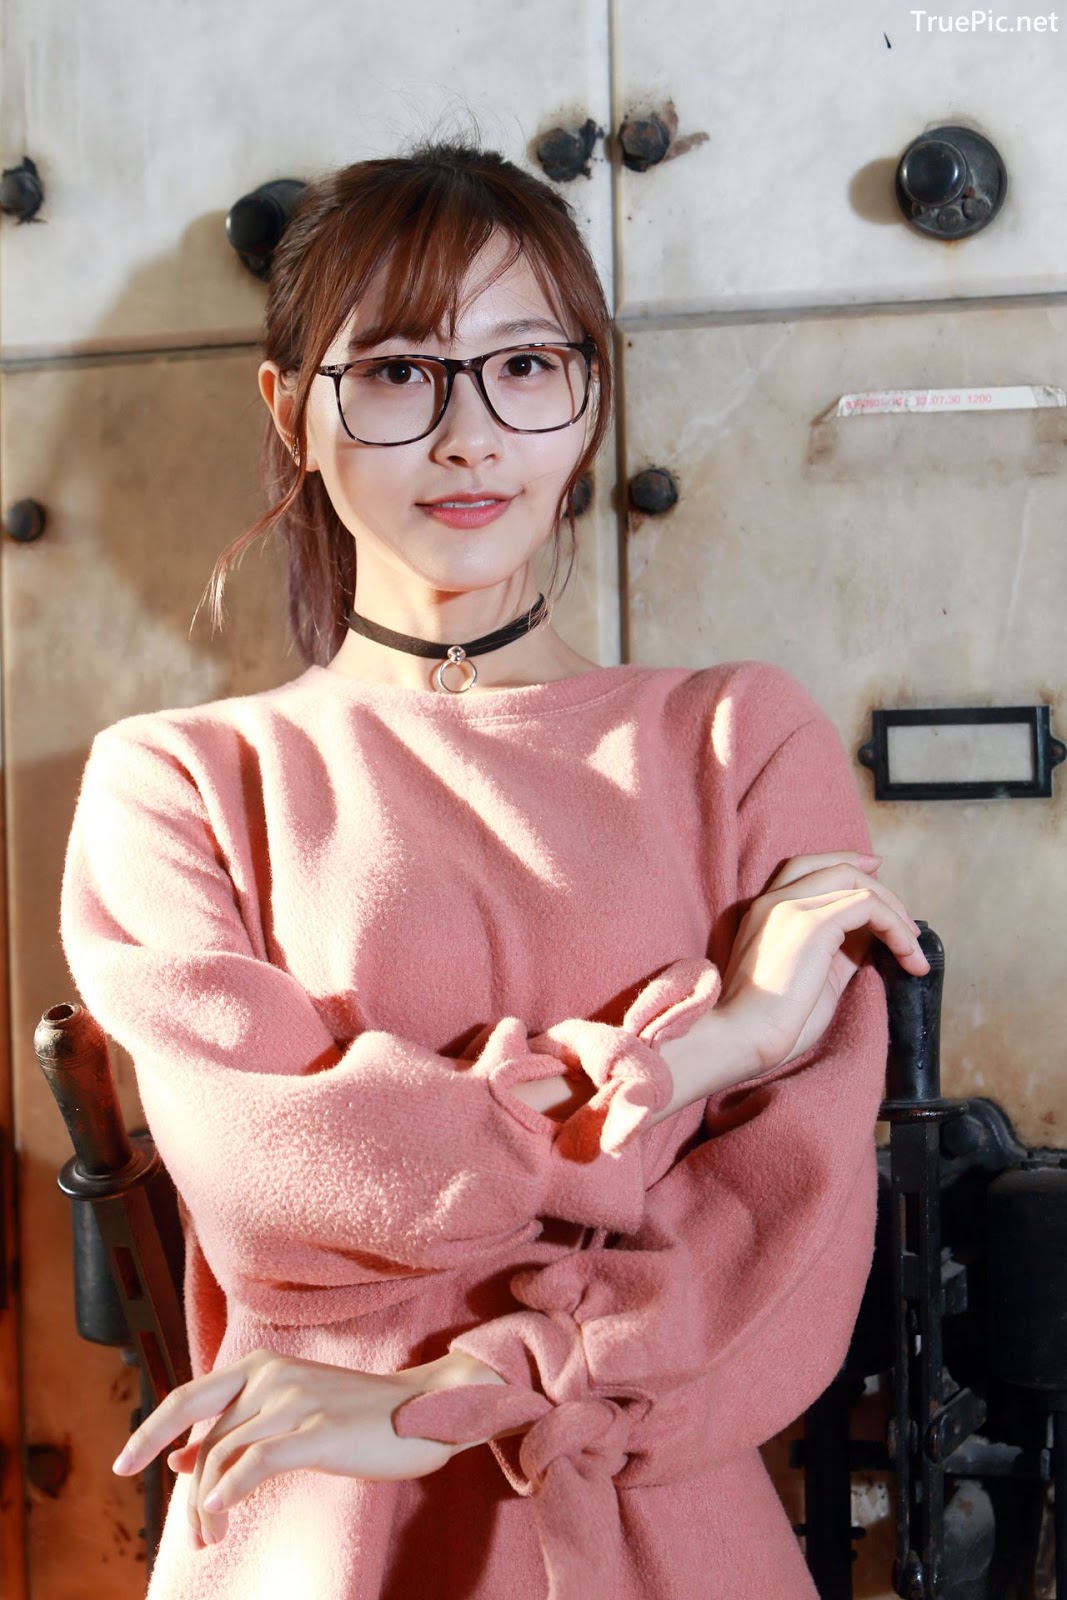 Image-Taiwanese-Model-郭思敏-Pure-And-Gorgeous-Girl-In-Pink-Sweater-Dress-TruePic.net- Picture-25